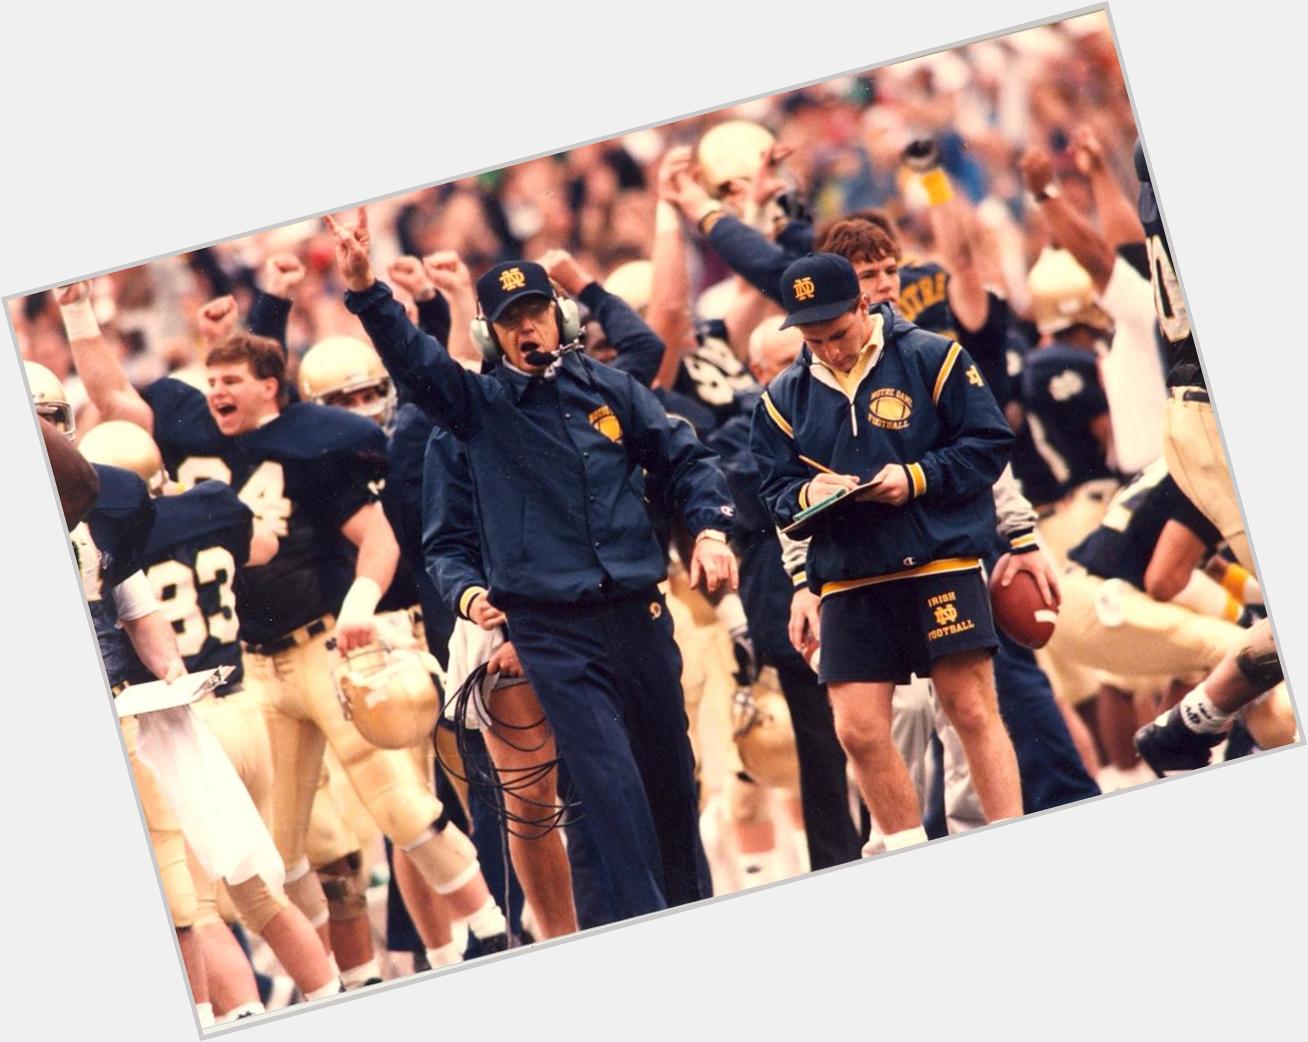 Happy 78th Birthday to one of the best Notre Dame football coaches! Hurray for Lou Holtz!! 